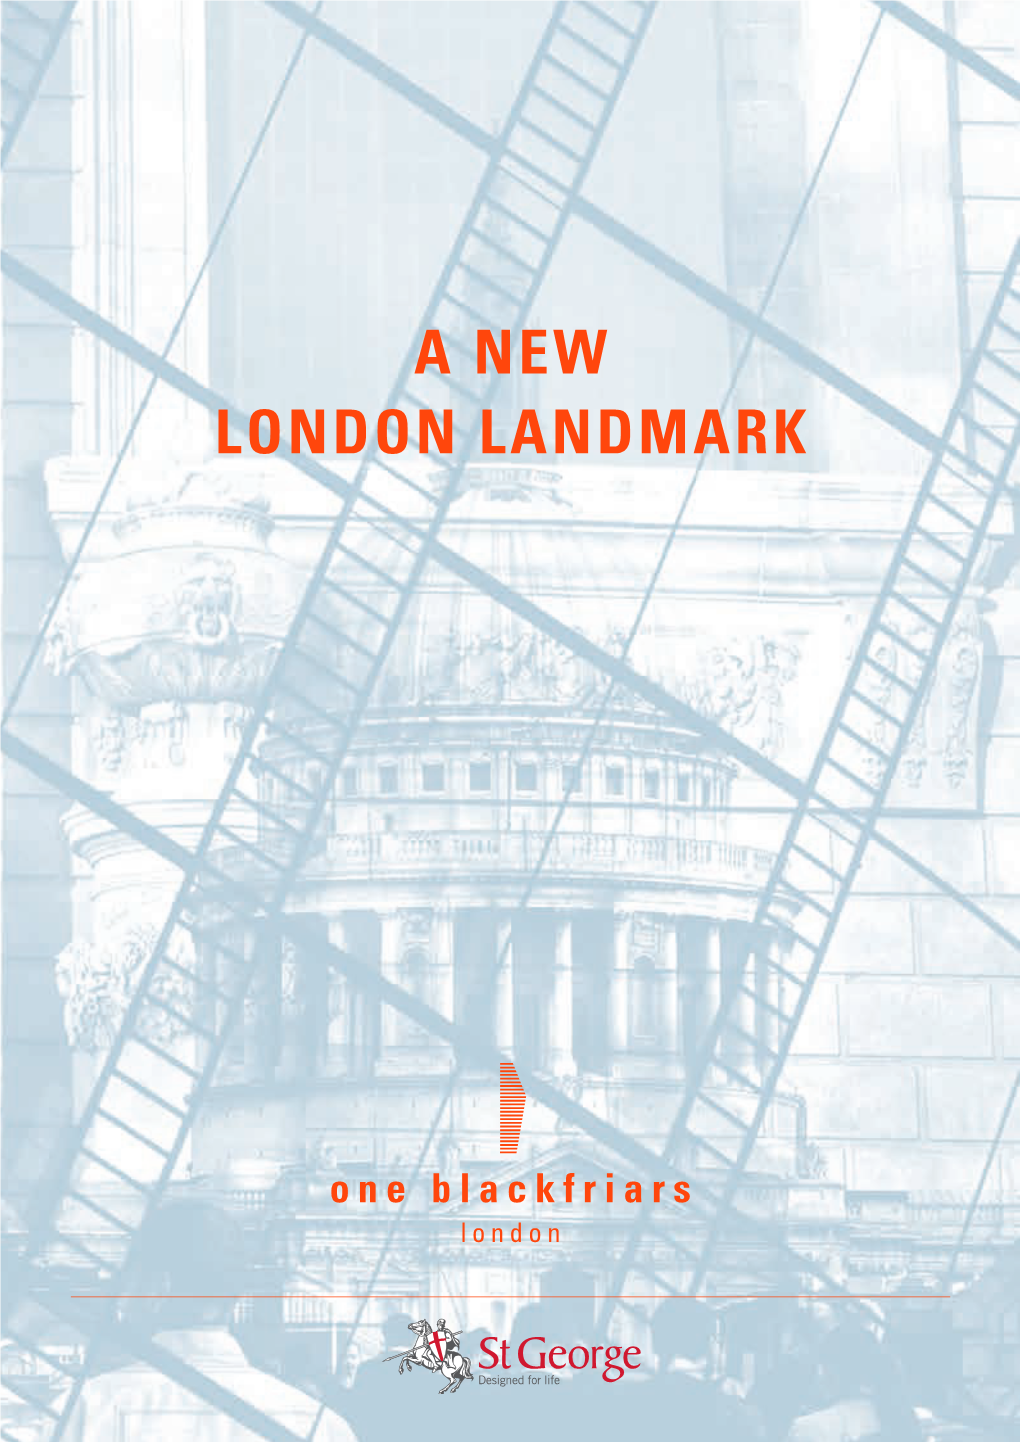 A New London Landmark One Blackfriars Is a Magnificent Addition to the London Skyline